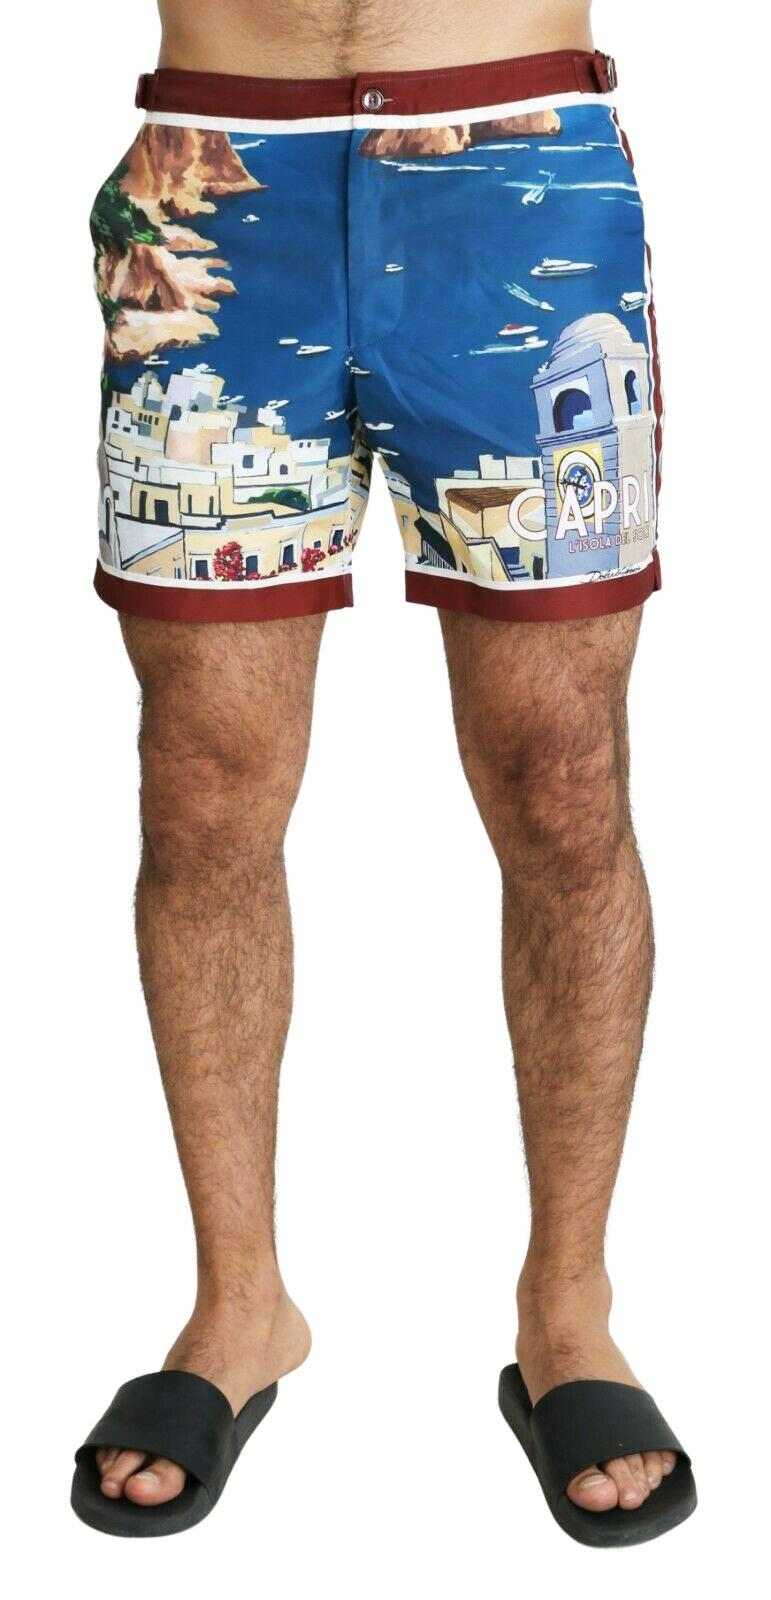 DOLCE & GABBANA

Absolutely stunning, 100% Authentic, exclusive brand new with tags Dolce & Gabbana Beachwear with Capri printed expandable swim shorts. Board shorts with pockets, closure with button and logoed zip.



Modell: Swimshorts Trunks